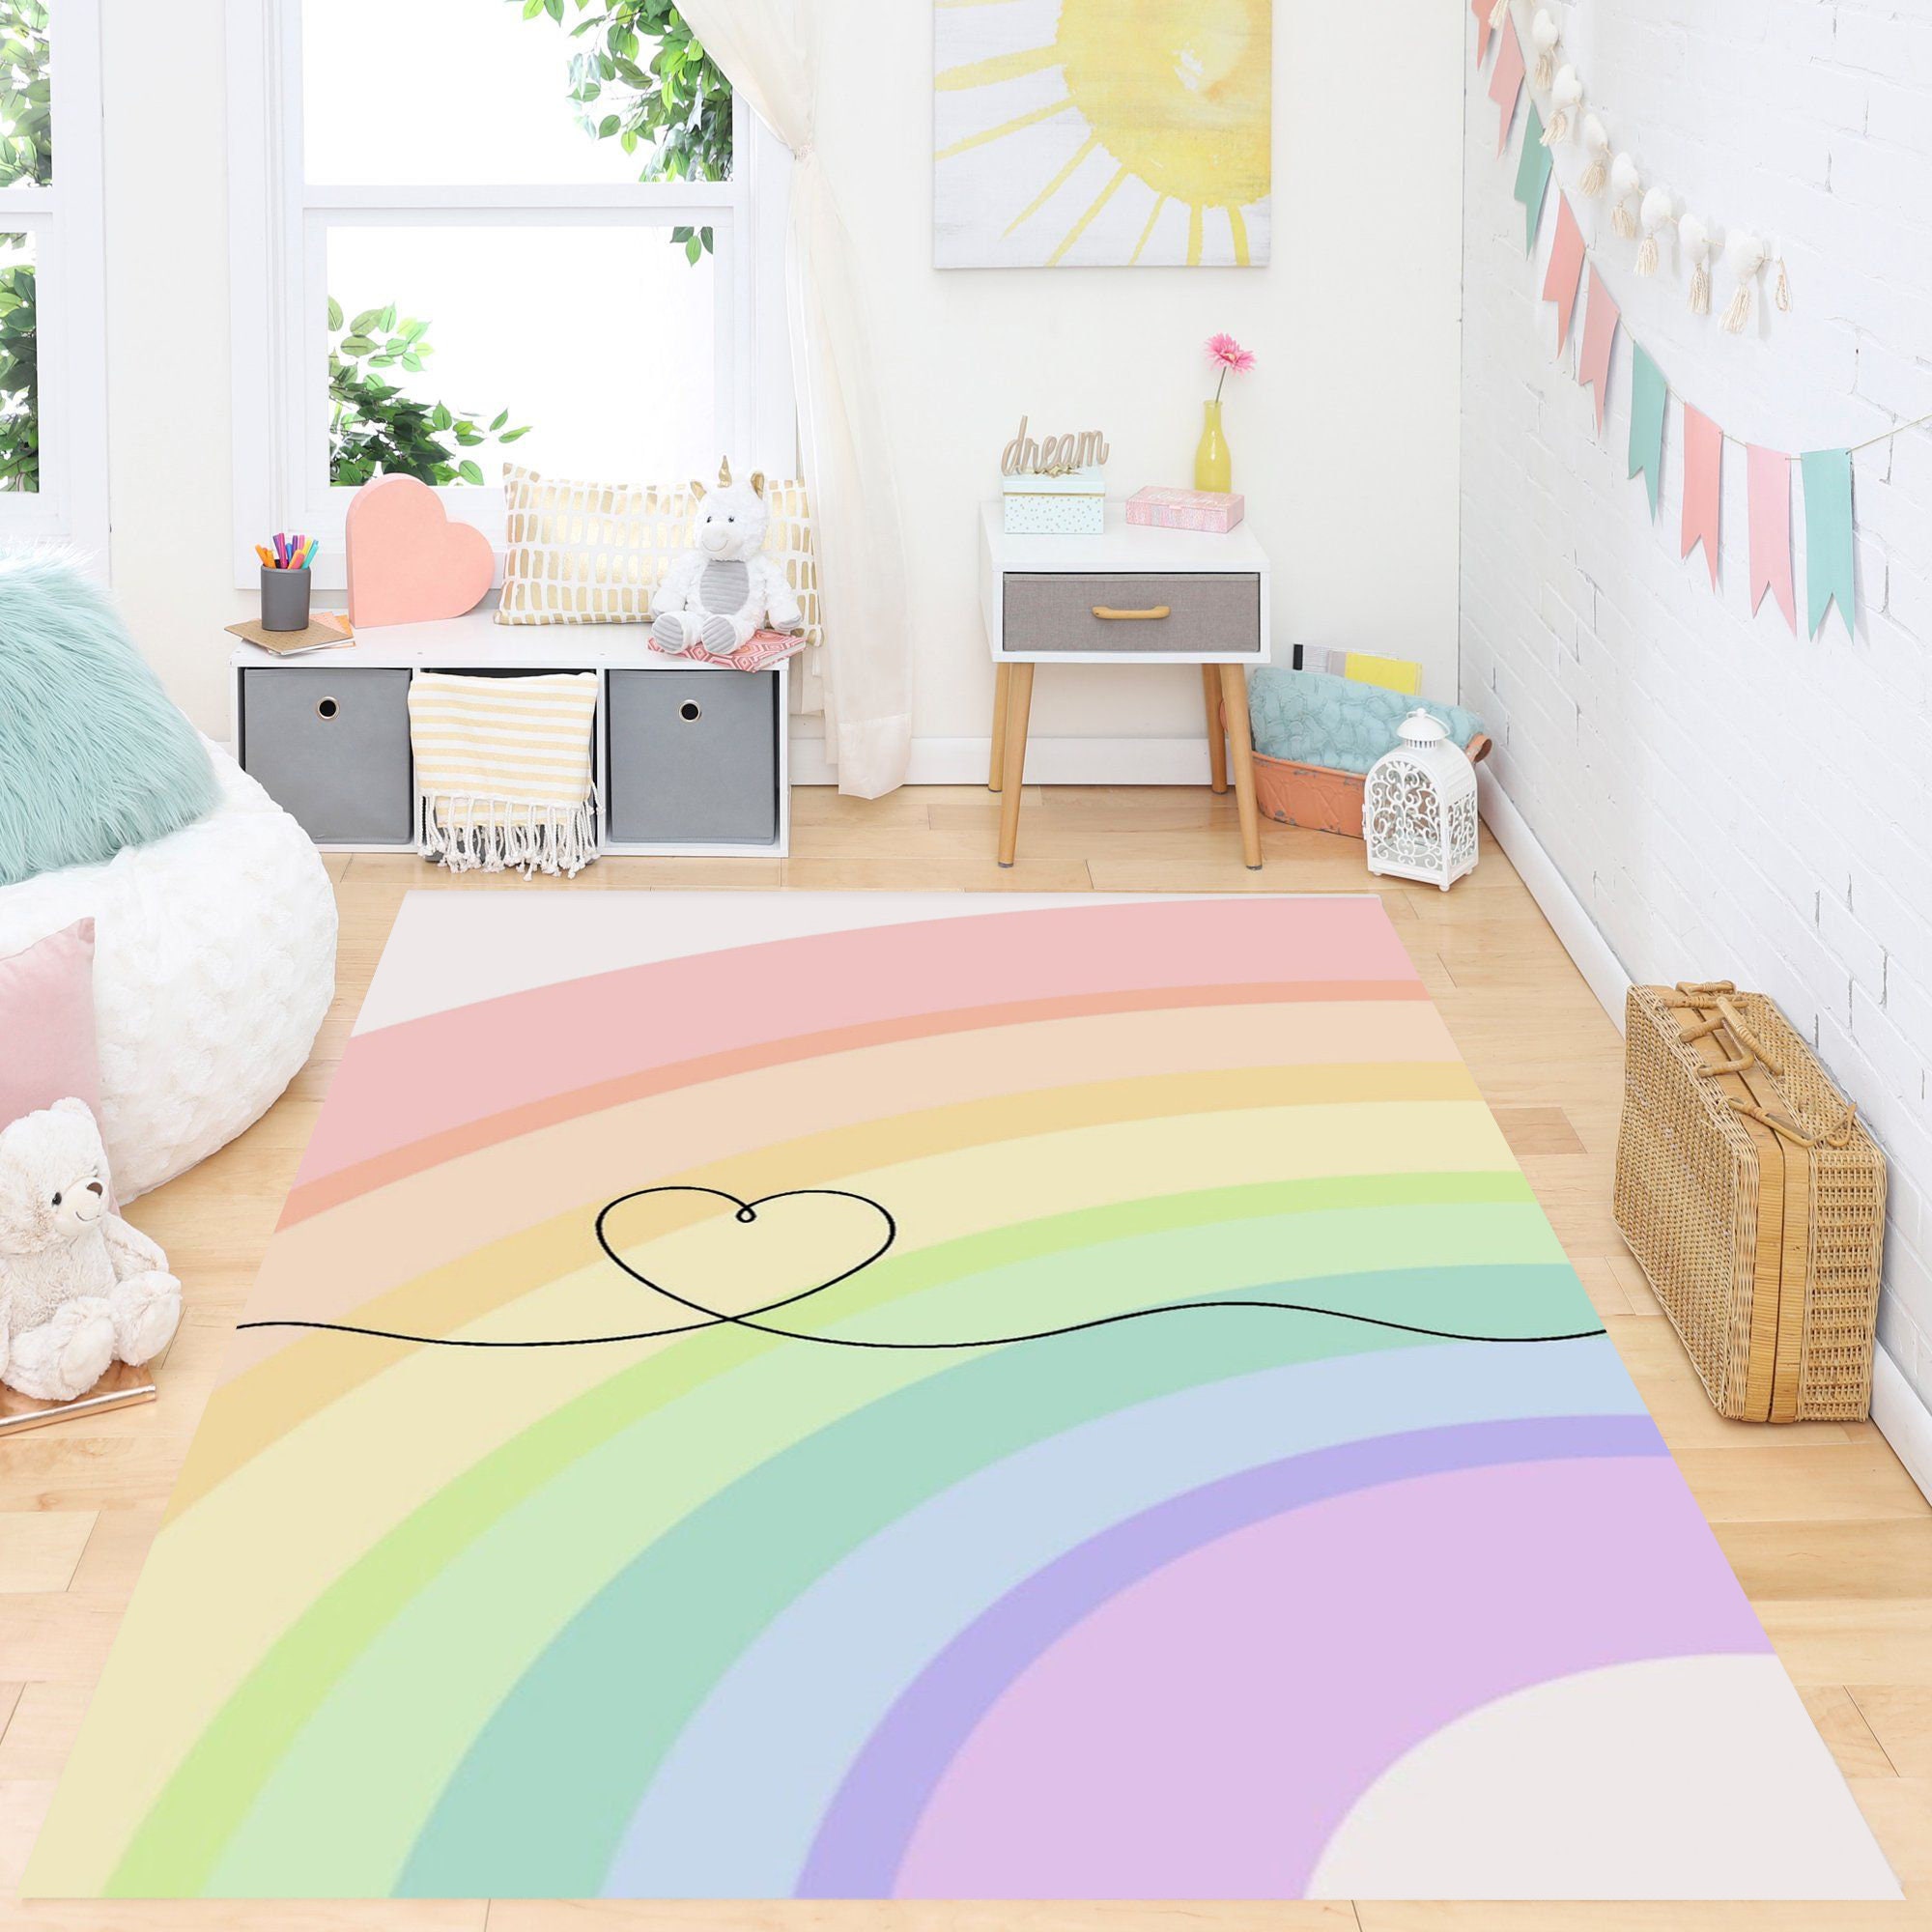 80x160cm Shaggy Playing Mat for Kids Baby Girls Bedroom Nursery Home Decor Modern Fluffy Colorful Rugs Cute Floor Carpets Wongfon Rainbow Area Rugs for Girls Room 